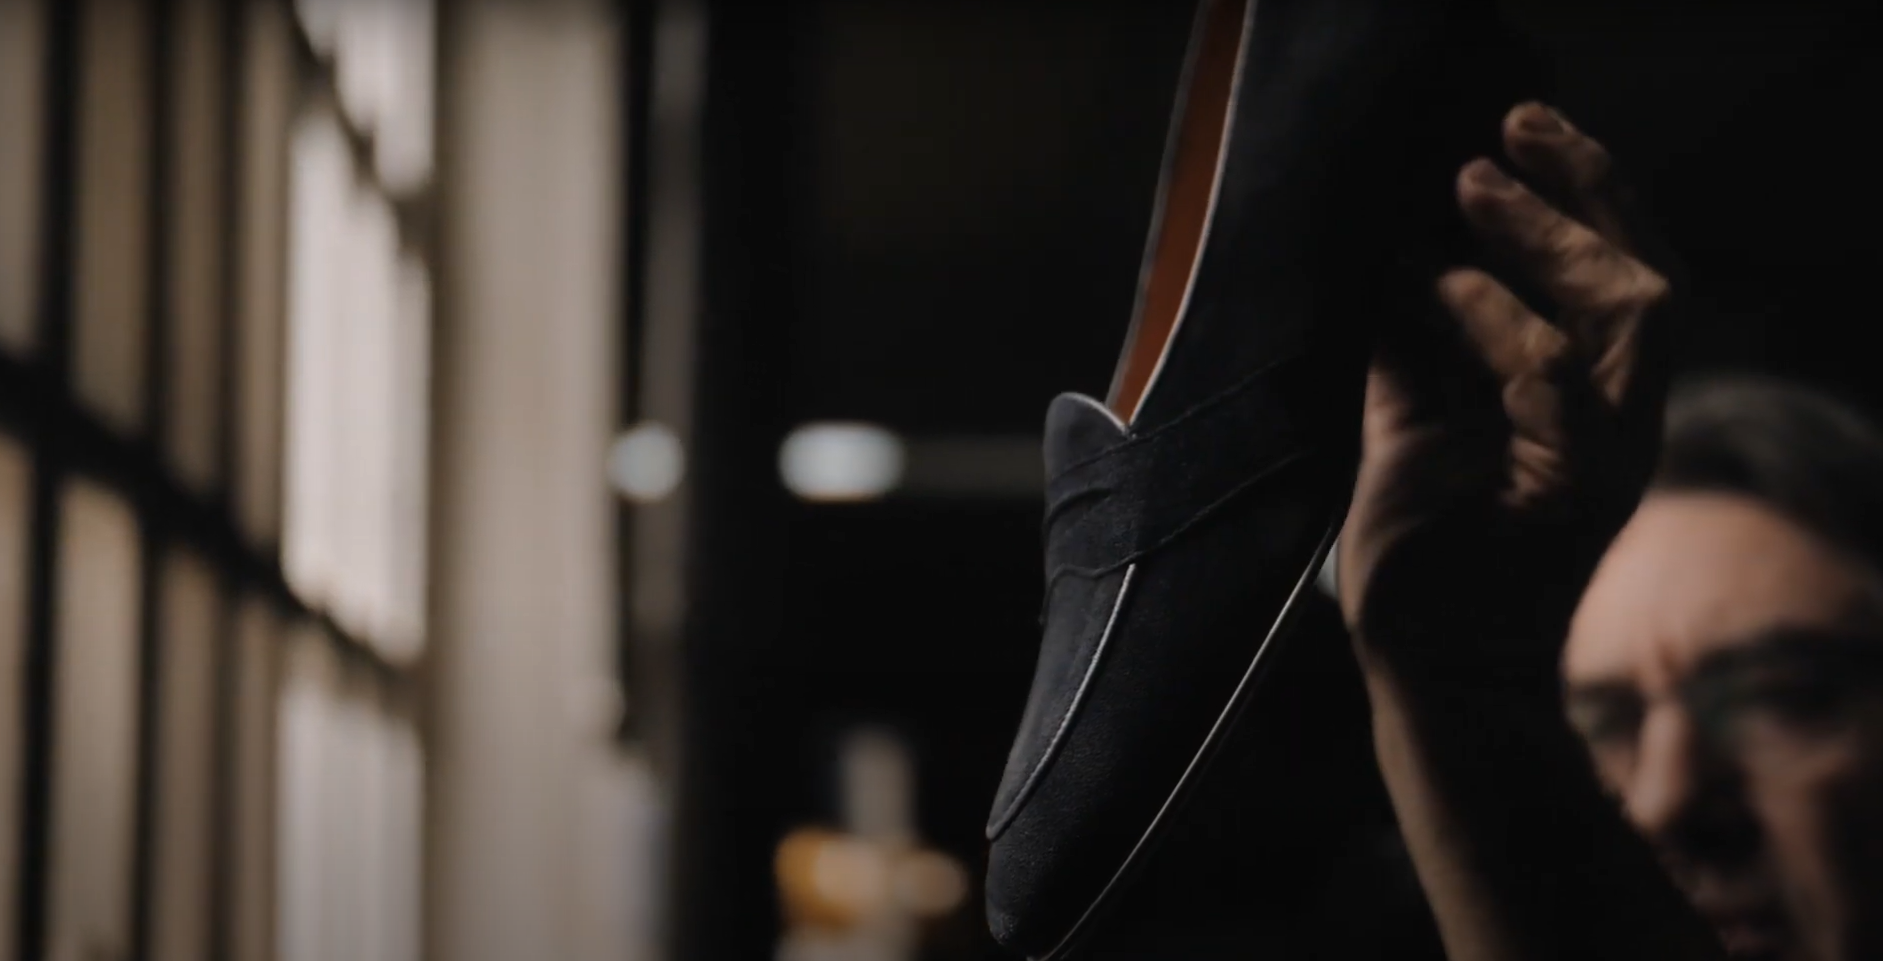 Load video: Our shoemakers in the Atelier